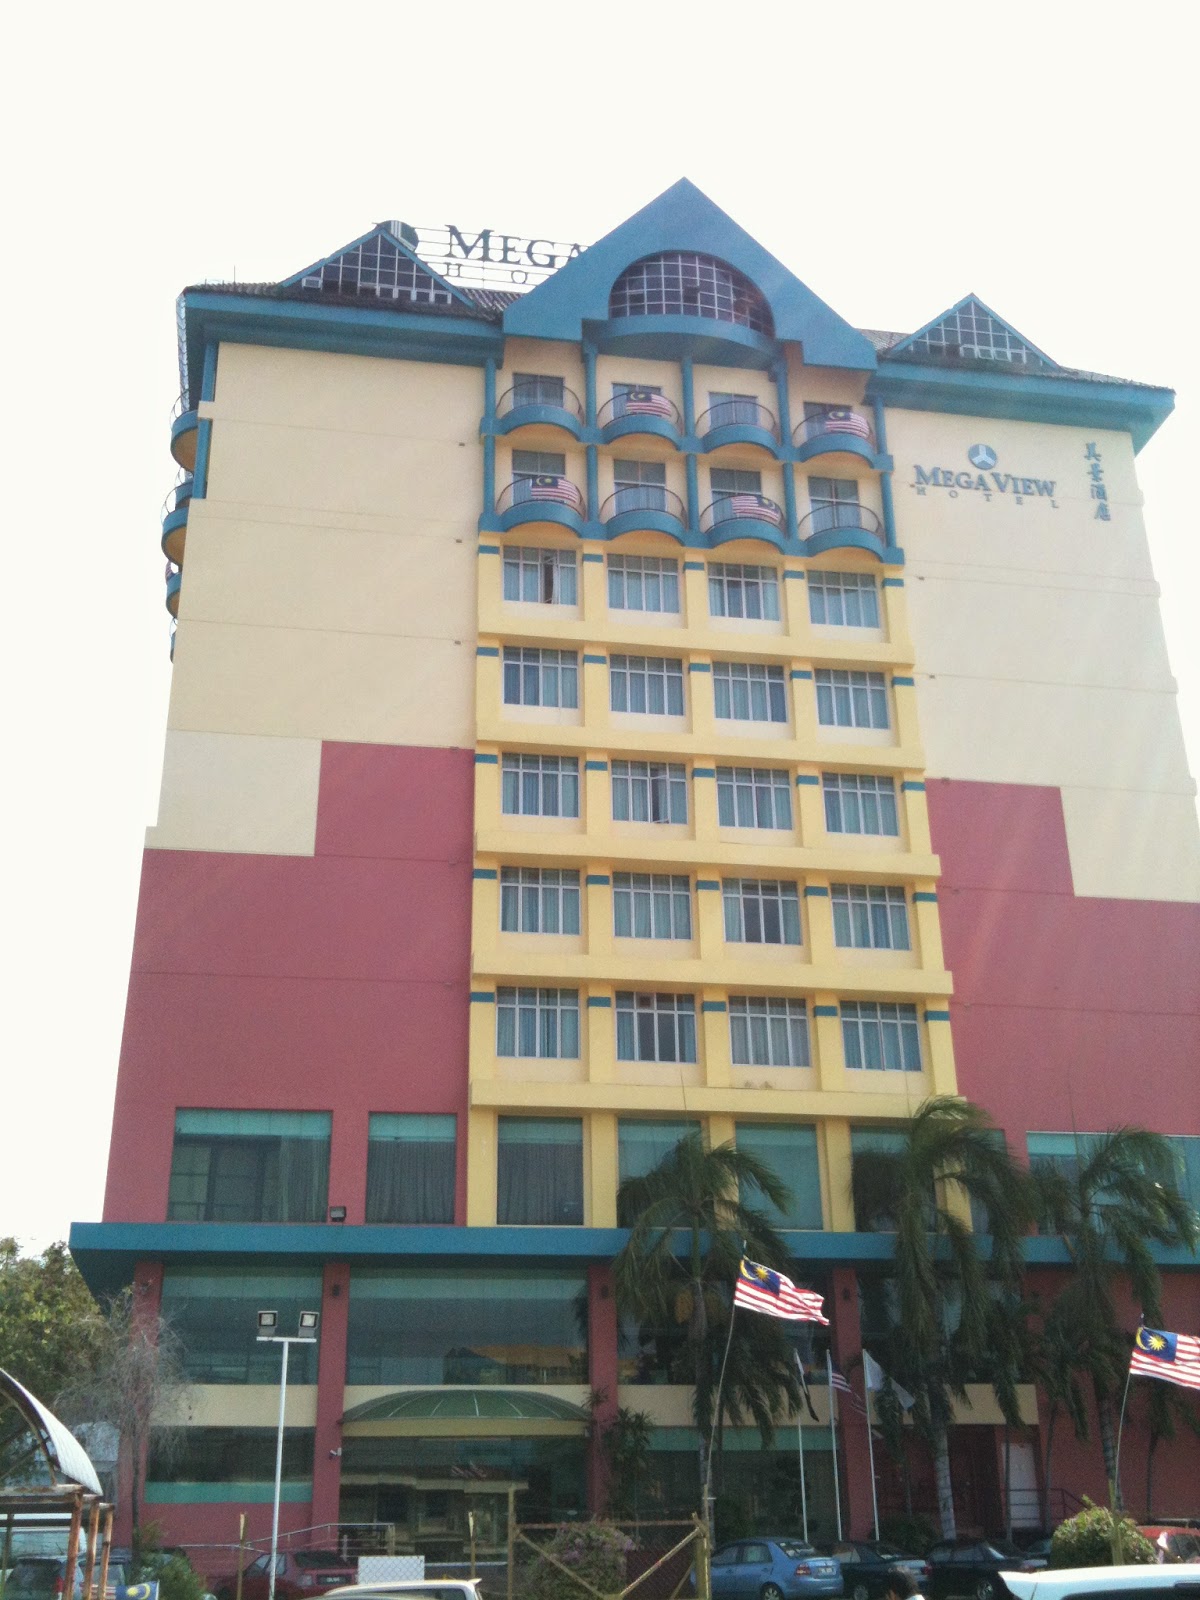 There's more to life: Mega View Hotel, Kuantan